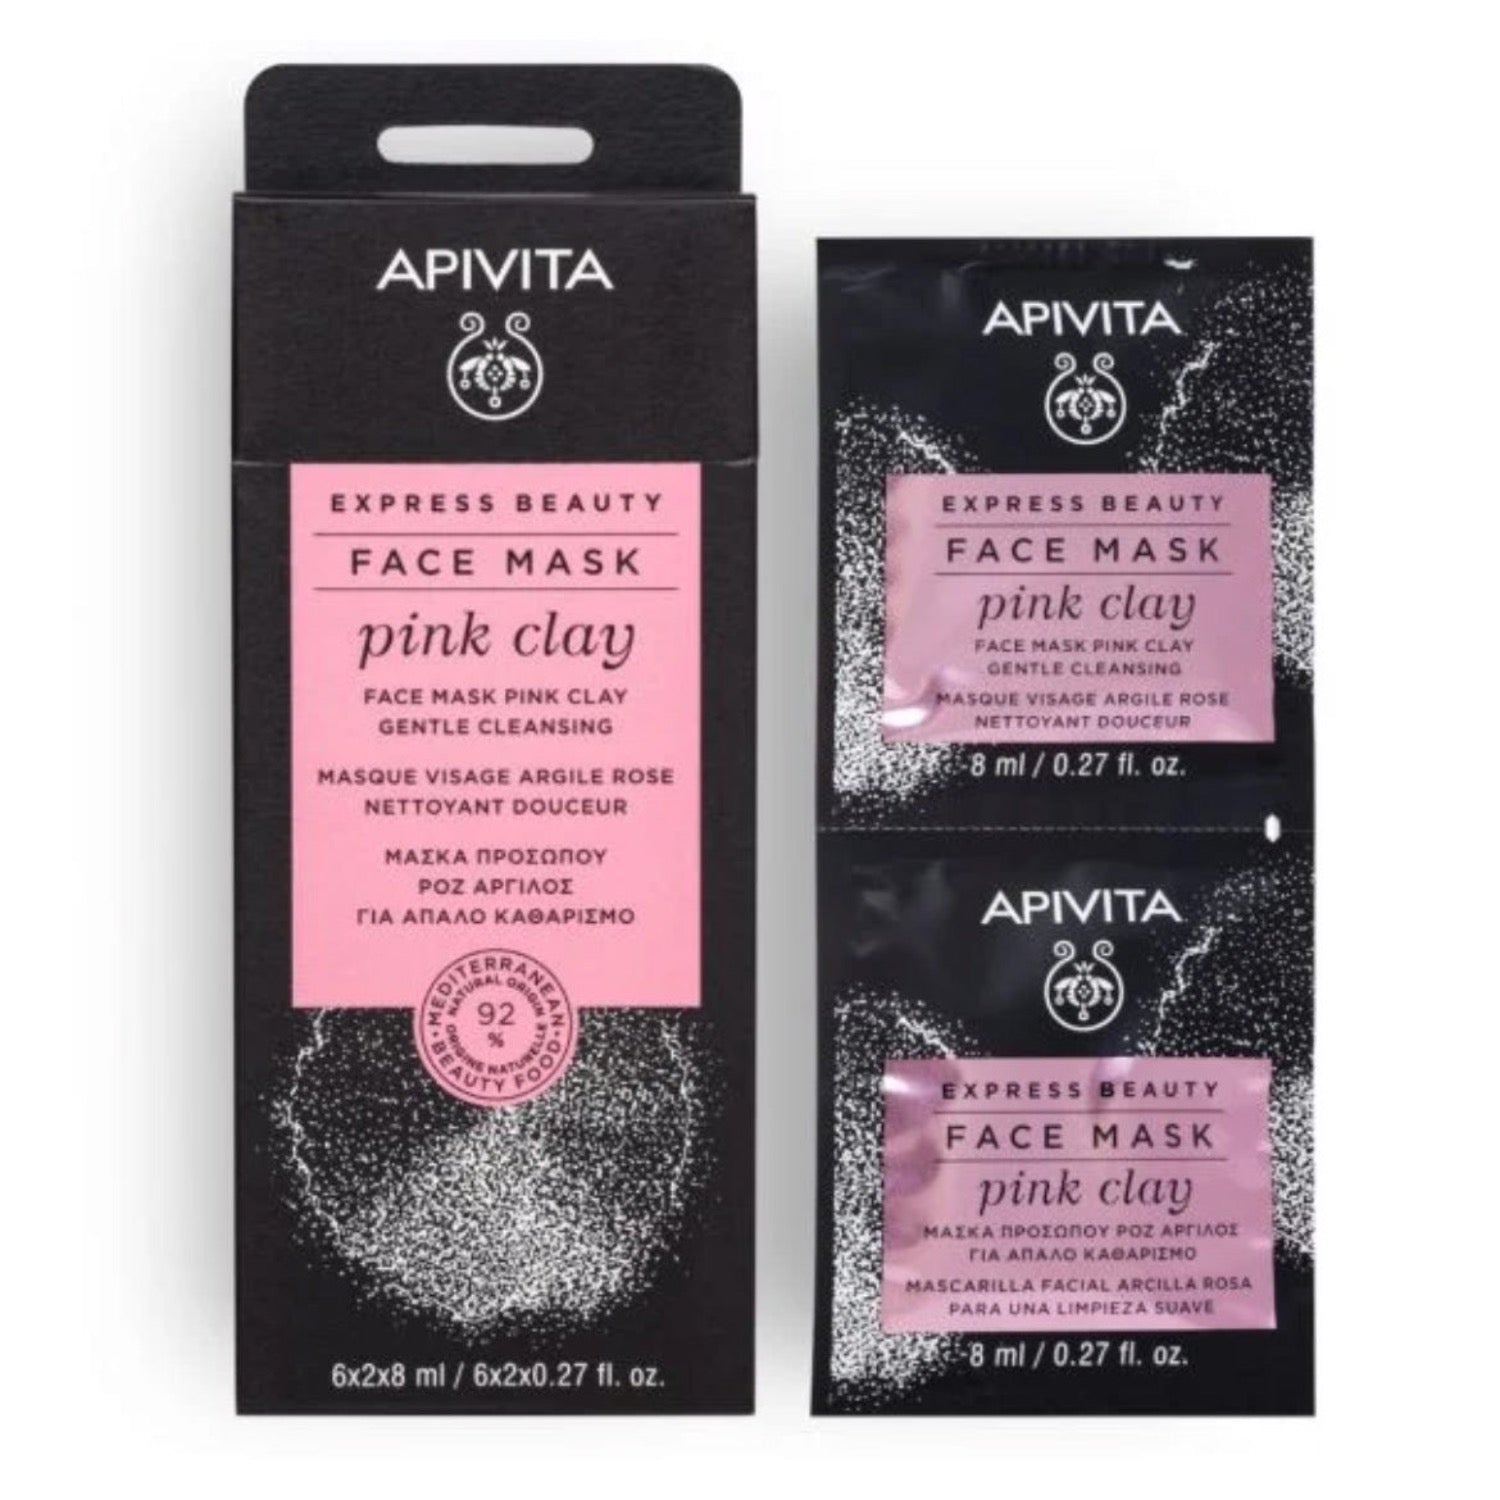 Apivita pink clay face mask with pink clay contains the most gentle clay, abundant in trace elements. It respects and cleanses even the most delicate skin, reducing pore visibility thanks to pink clay and saponaria.